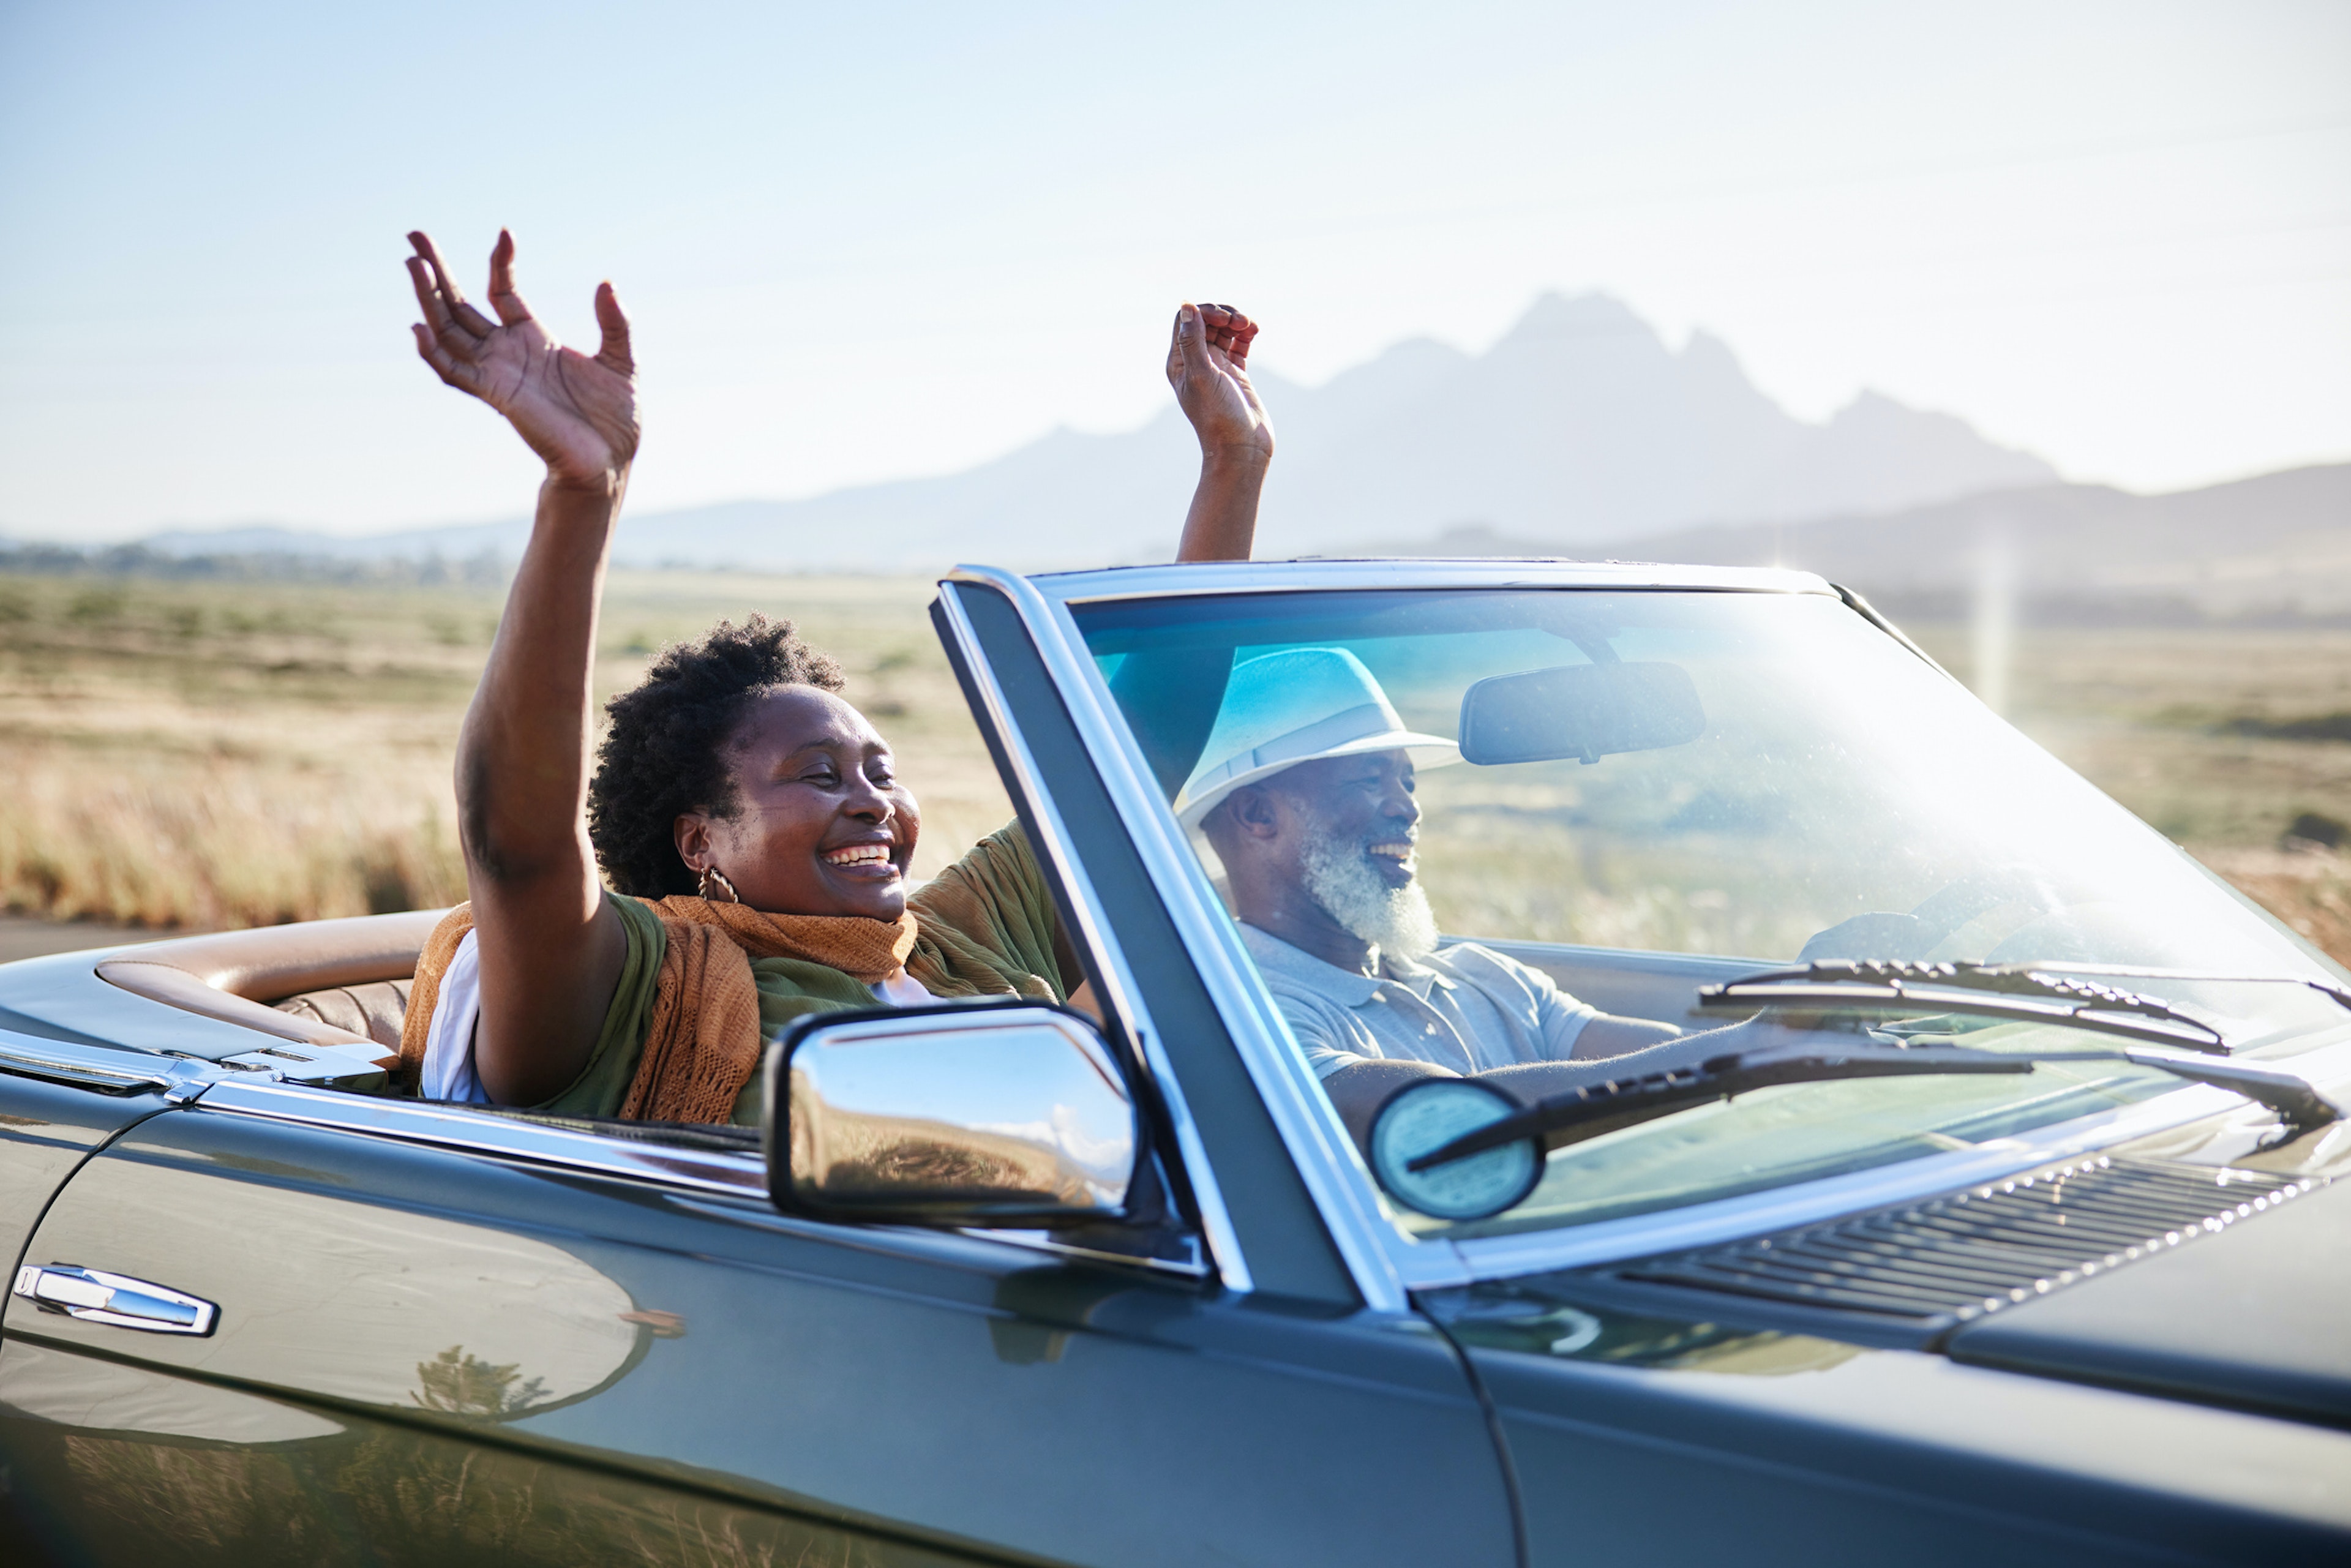 Mature African woman smiling with her hands raised in the air during a scenic road trip with her husband in their convertible
1387323834
Mature African woman smiling with her hands raised in the air during a scenic road trip with her husband in their convertible